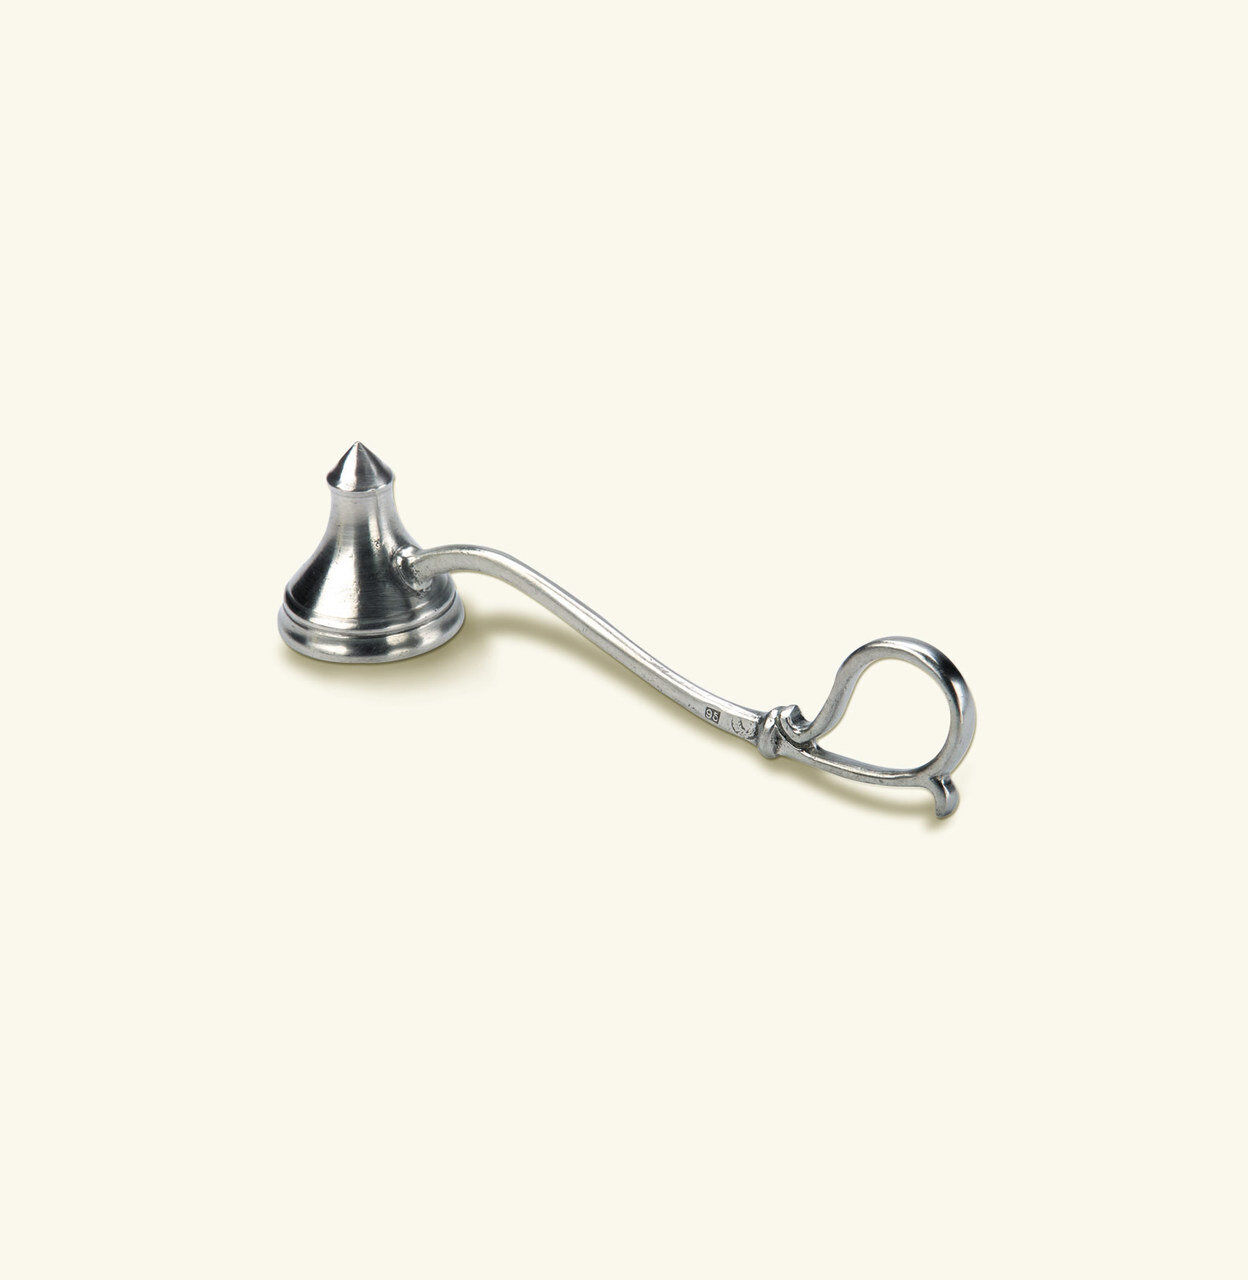 Match Pewter Candle Snuffer Curved 828